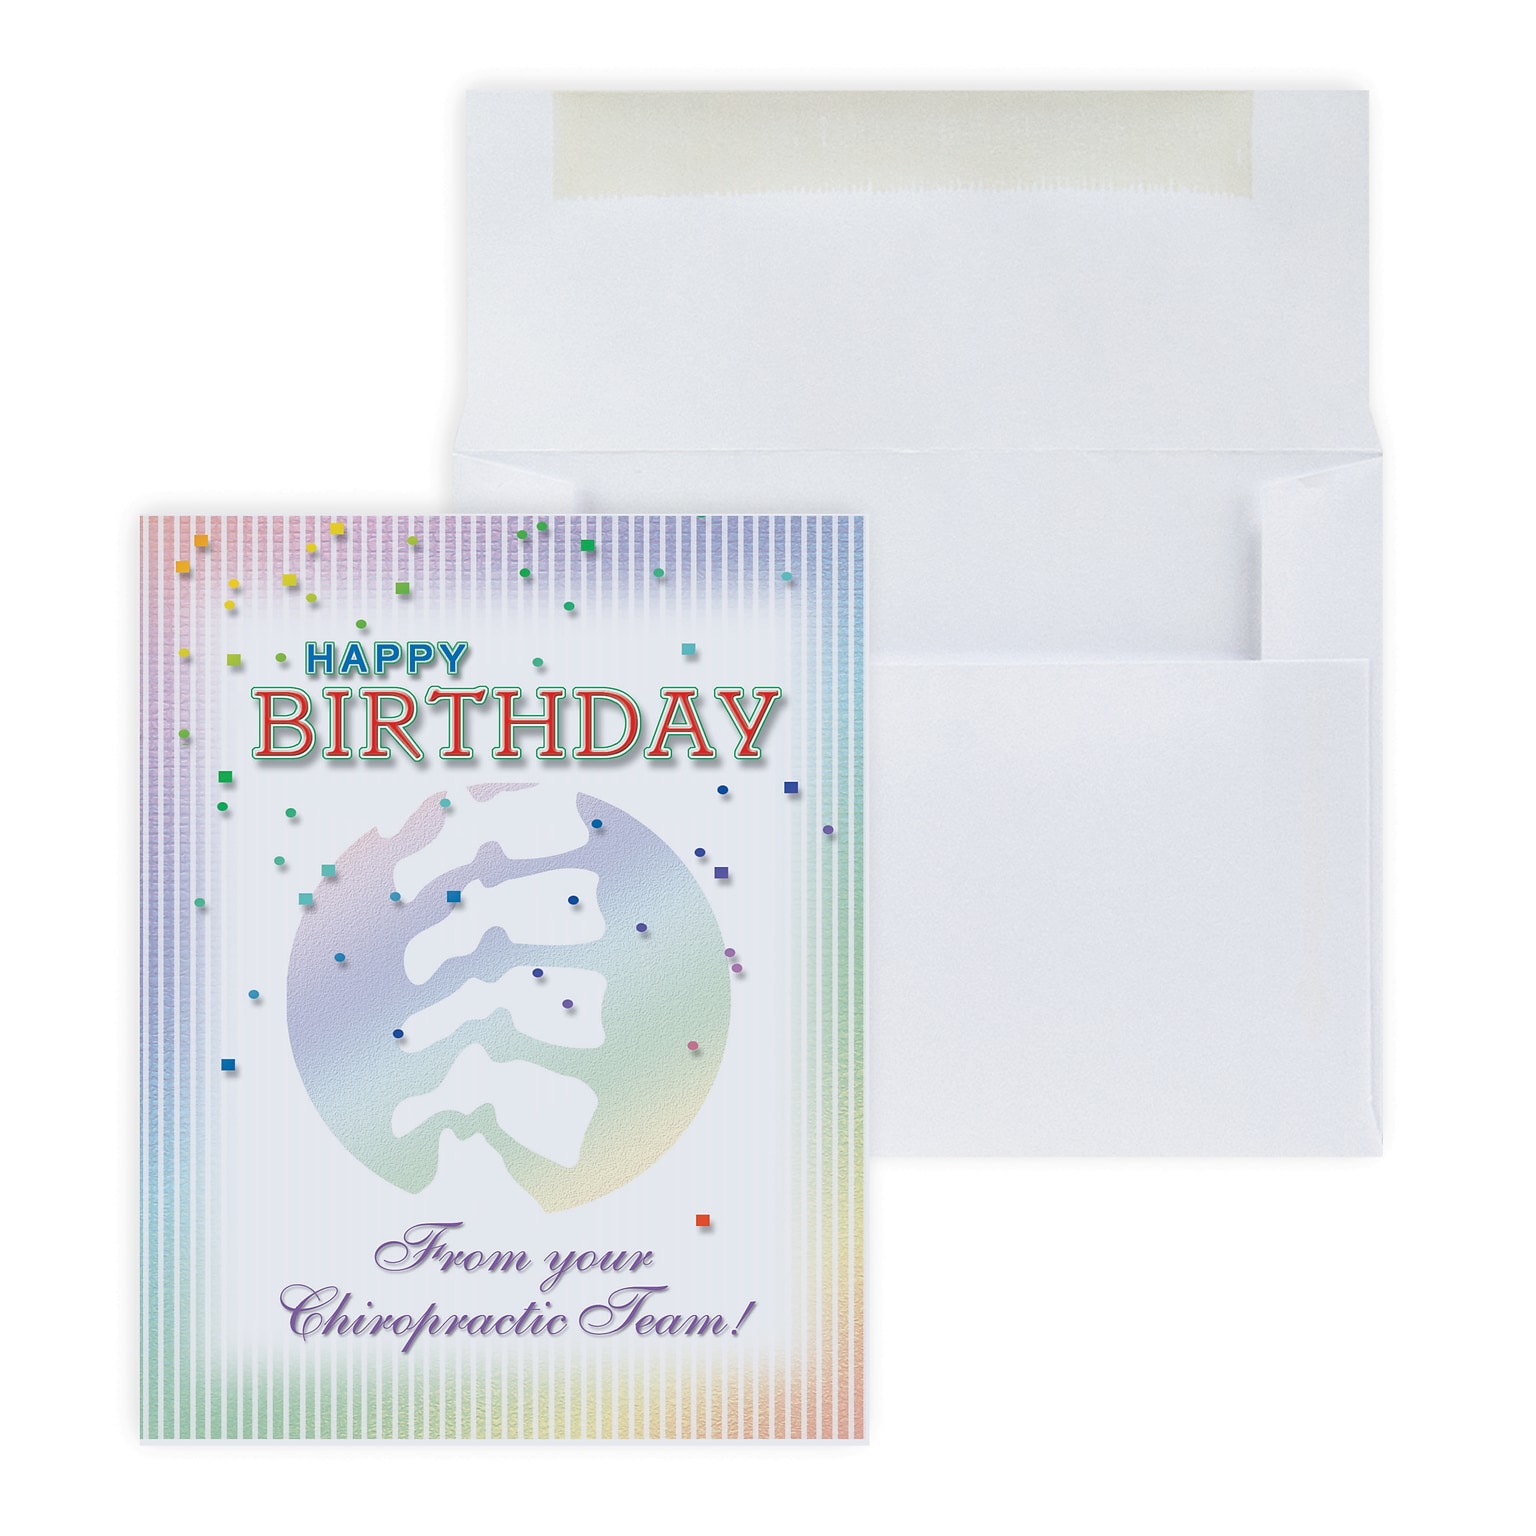 Custom Happy Birthday from Chiropractic Team Greeting Cards, With Envelopes, 4-1/4 x 5-3/8, 25 Cards per Set